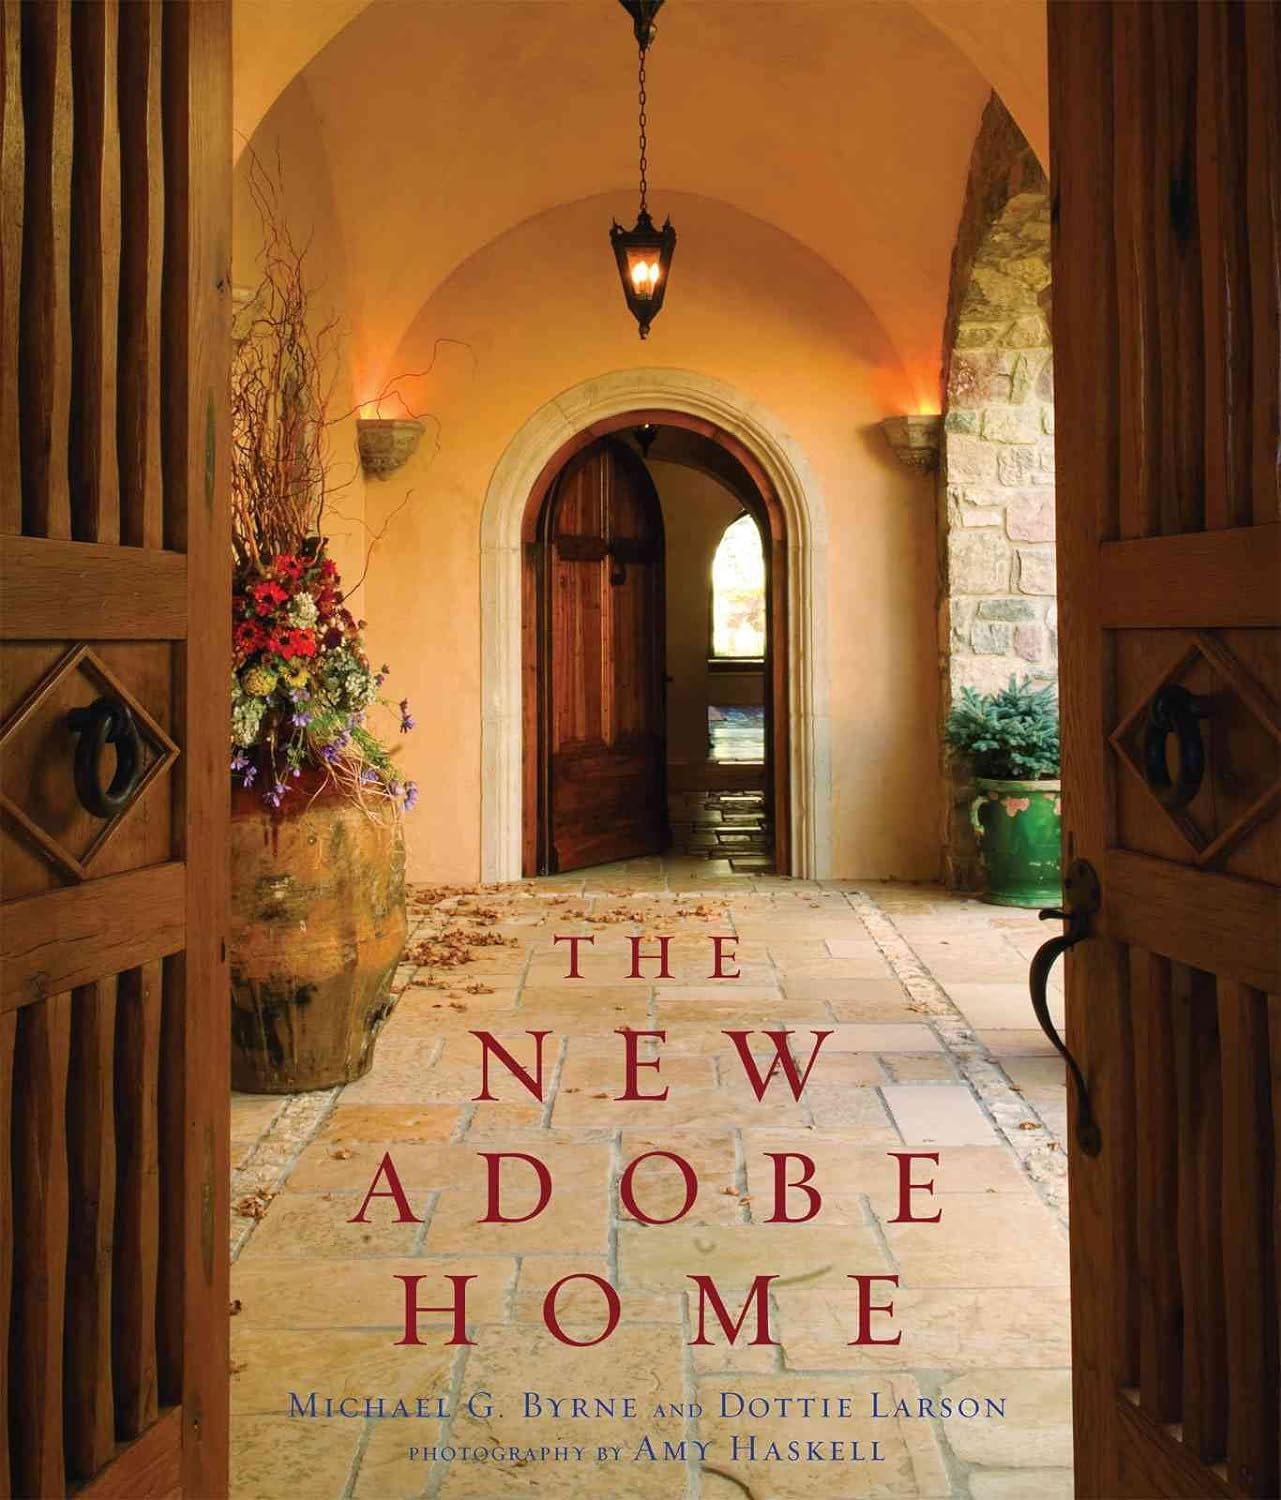 The New Adobe Home Hardcover – February 17, 2009 by Michael Byrne (Author), Dottie Larson (Author)